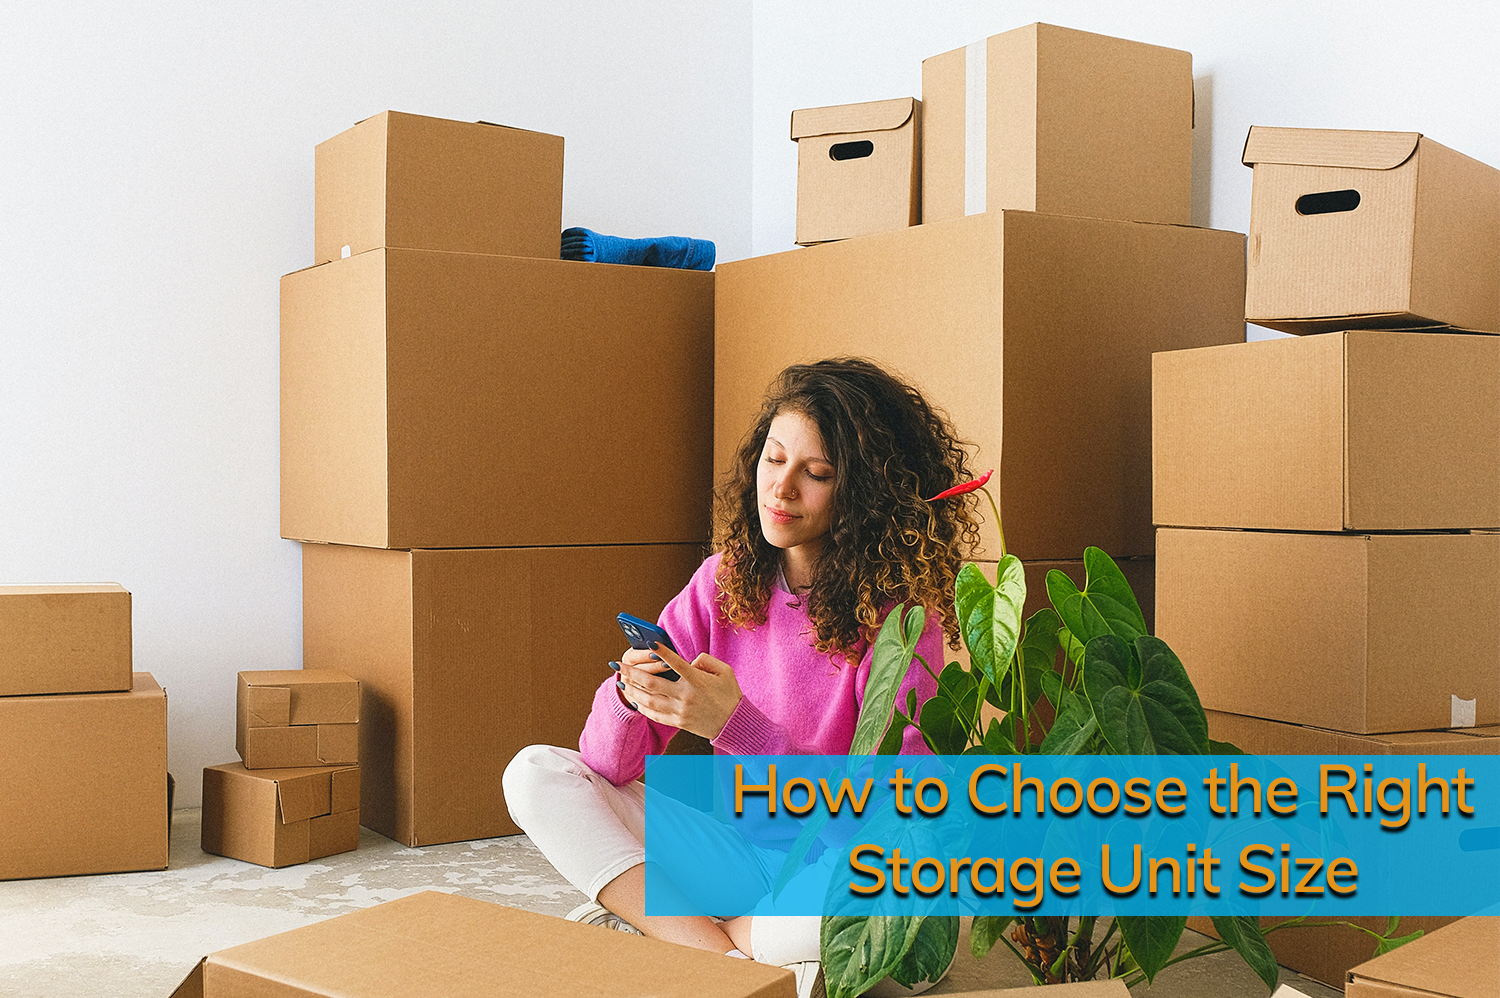 Woman with brown curly hair sitting on floor surrounded by cardboard boxes looking on phone deciding the right storage unit size for her needs.